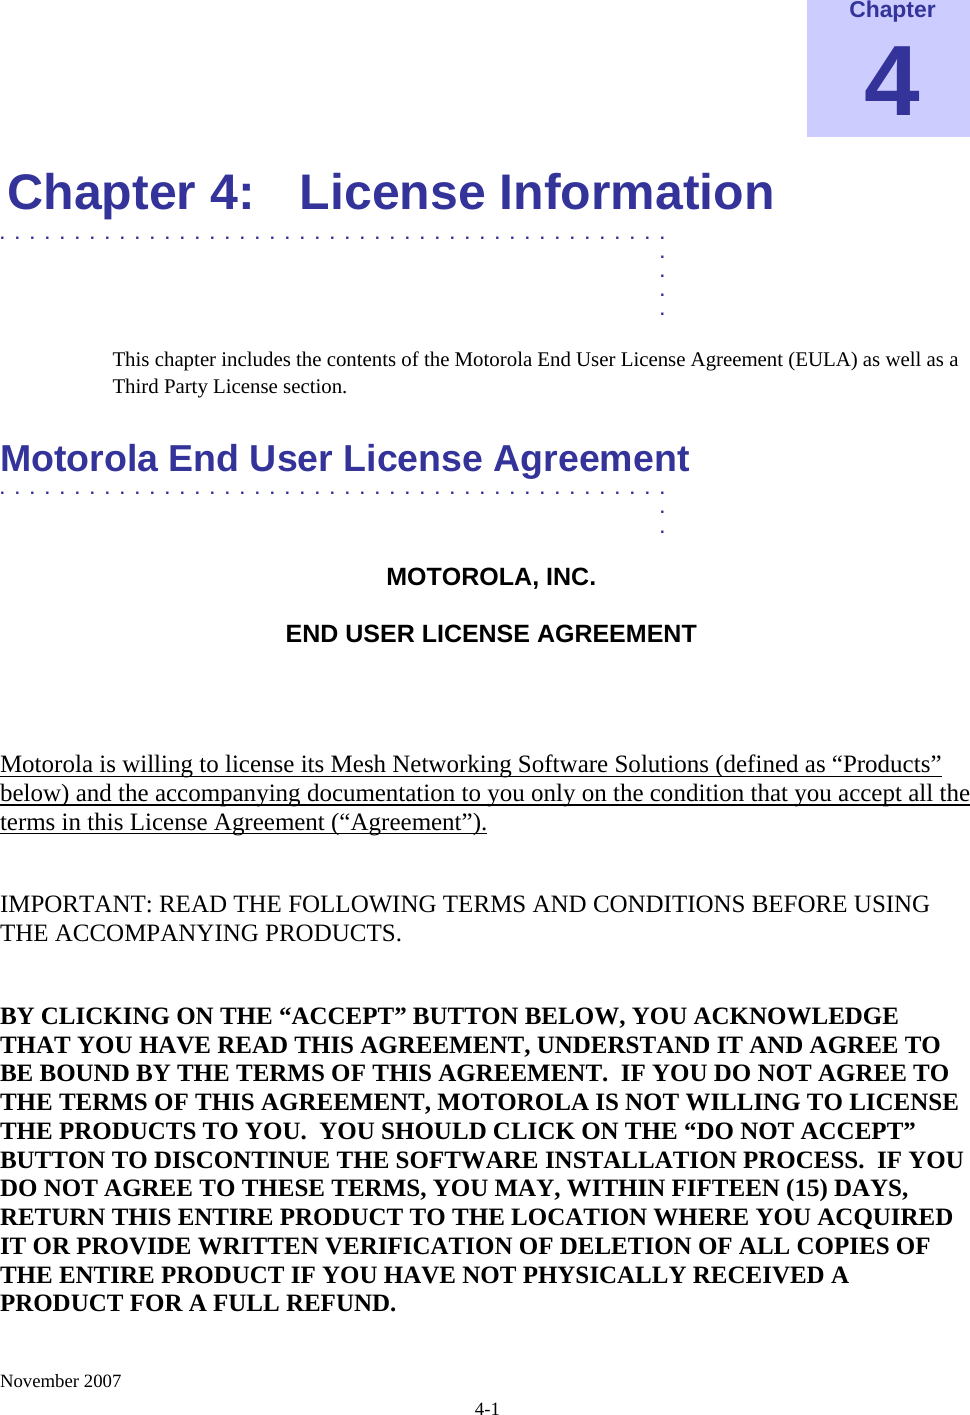    November 2007 4-1 Chapter 4 Chapter 4:  License Information .............................................  .  .  .  . This chapter includes the contents of the Motorola End User License Agreement (EULA) as well as a Third Party License section.  Motorola End User License Agreement  .............................................  .  . MOTOROLA, INC.  END USER LICENSE AGREEMENT  Motorola is willing to license its Mesh Networking Software Solutions (defined as “Products” below) and the accompanying documentation to you only on the condition that you accept all the terms in this License Agreement (“Agreement”).  IMPORTANT: READ THE FOLLOWING TERMS AND CONDITIONS BEFORE USING THE ACCOMPANYING PRODUCTS.  BY CLICKING ON THE “ACCEPT” BUTTON BELOW, YOU ACKNOWLEDGE THAT YOU HAVE READ THIS AGREEMENT, UNDERSTAND IT AND AGREE TO BE BOUND BY THE TERMS OF THIS AGREEMENT.  IF YOU DO NOT AGREE TO THE TERMS OF THIS AGREEMENT, MOTOROLA IS NOT WILLING TO LICENSE THE PRODUCTS TO YOU.  YOU SHOULD CLICK ON THE “DO NOT ACCEPT” BUTTON TO DISCONTINUE THE SOFTWARE INSTALLATION PROCESS.  IF YOU DO NOT AGREE TO THESE TERMS, YOU MAY, WITHIN FIFTEEN (15) DAYS, RETURN THIS ENTIRE PRODUCT TO THE LOCATION WHERE YOU ACQUIRED IT OR PROVIDE WRITTEN VERIFICATION OF DELETION OF ALL COPIES OF THE ENTIRE PRODUCT IF YOU HAVE NOT PHYSICALLY RECEIVED A PRODUCT FOR A FULL REFUND.   